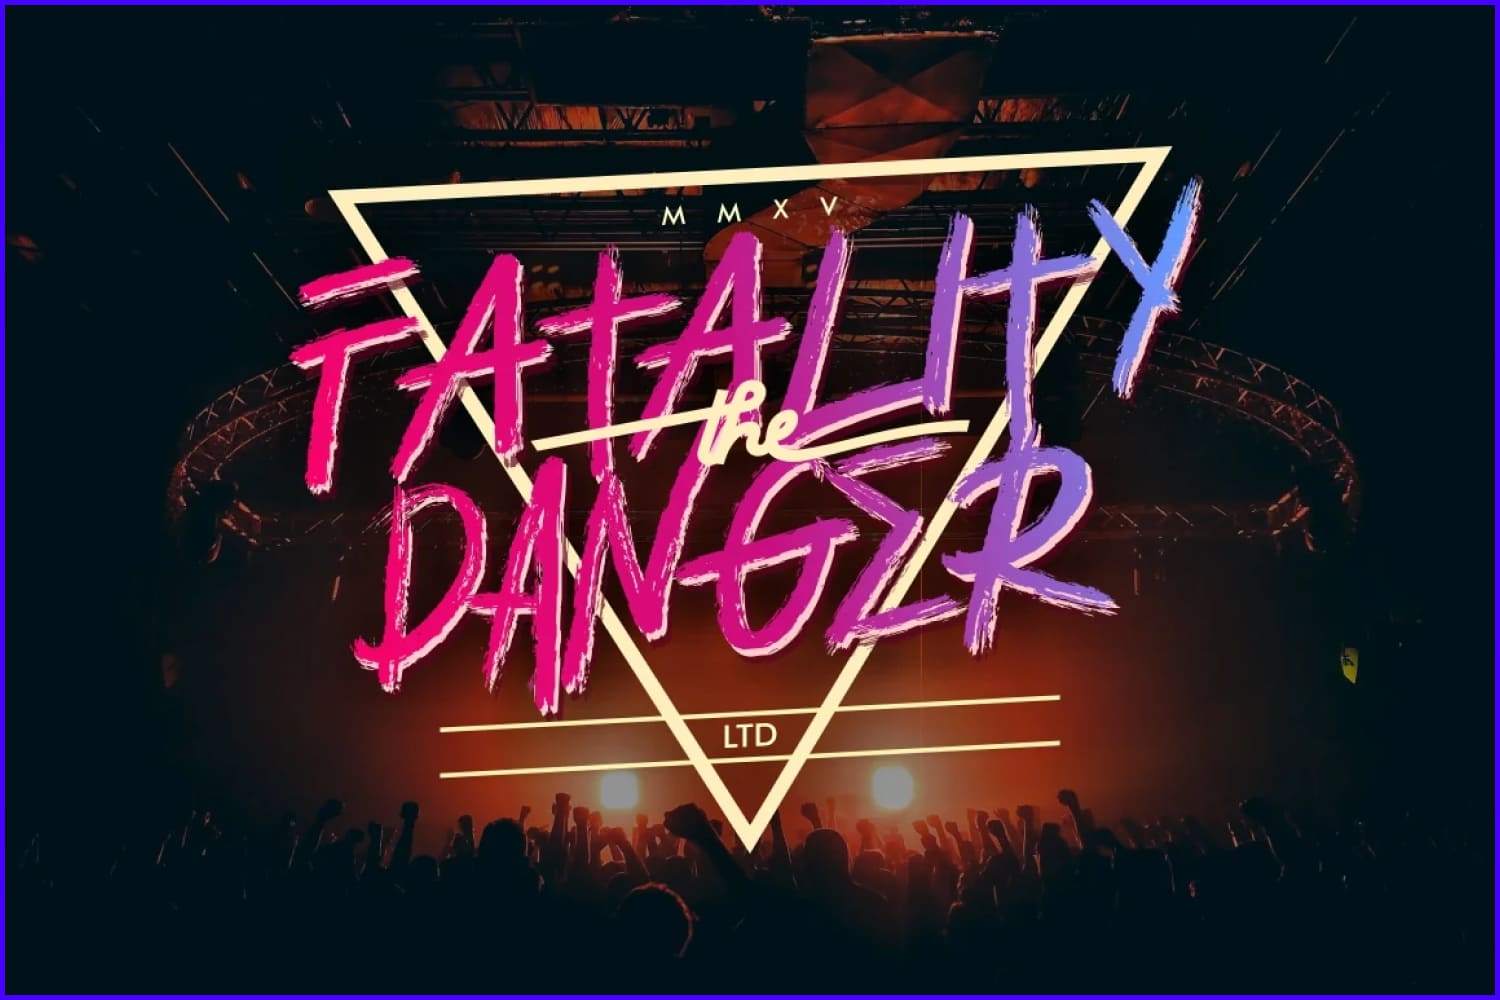 Text Fatality Danger on the background of the night concert.